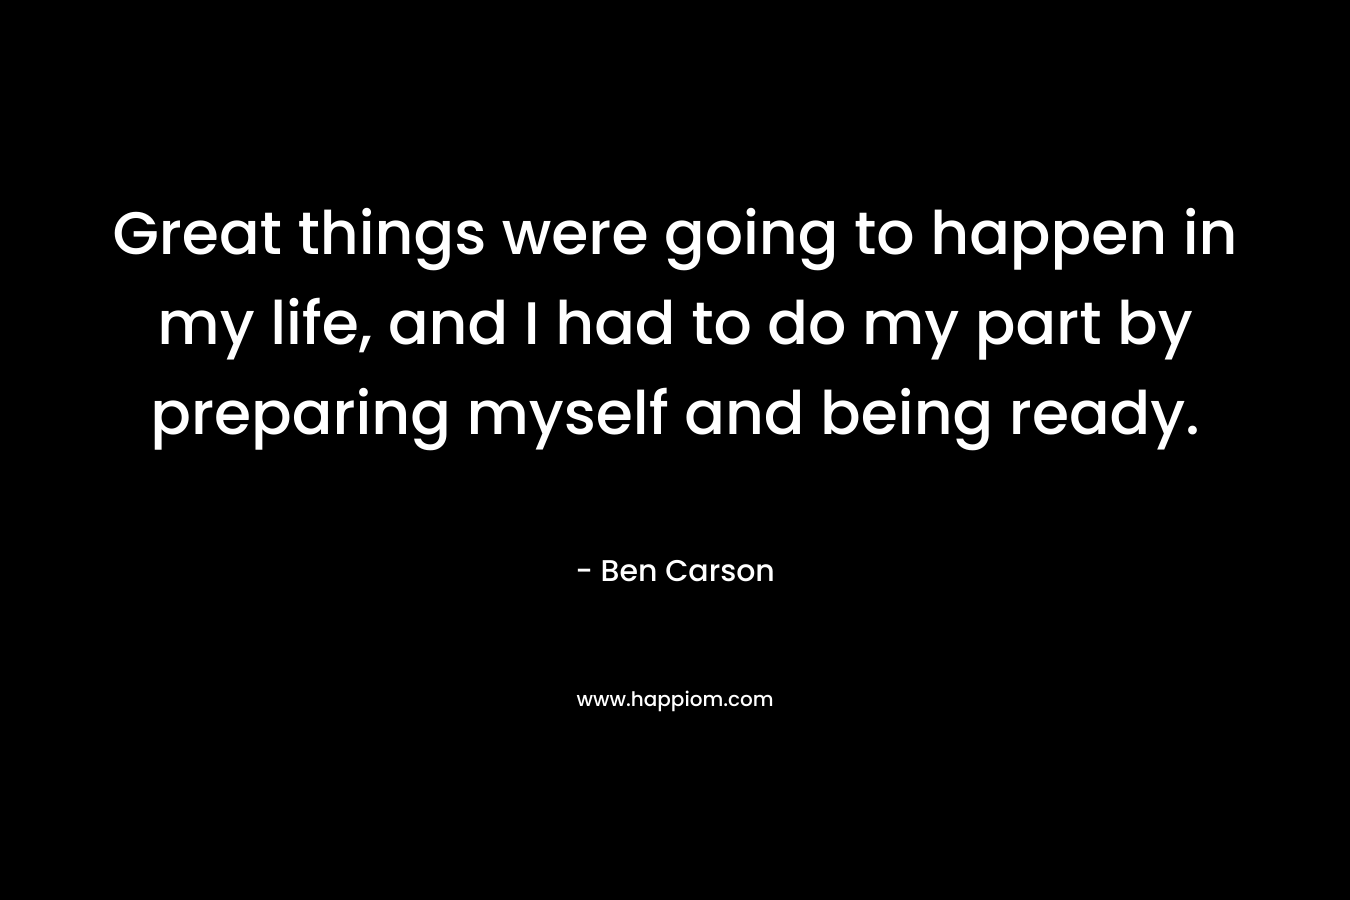 Great things were going to happen in my life, and I had to do my part by preparing myself and being ready. – Ben Carson